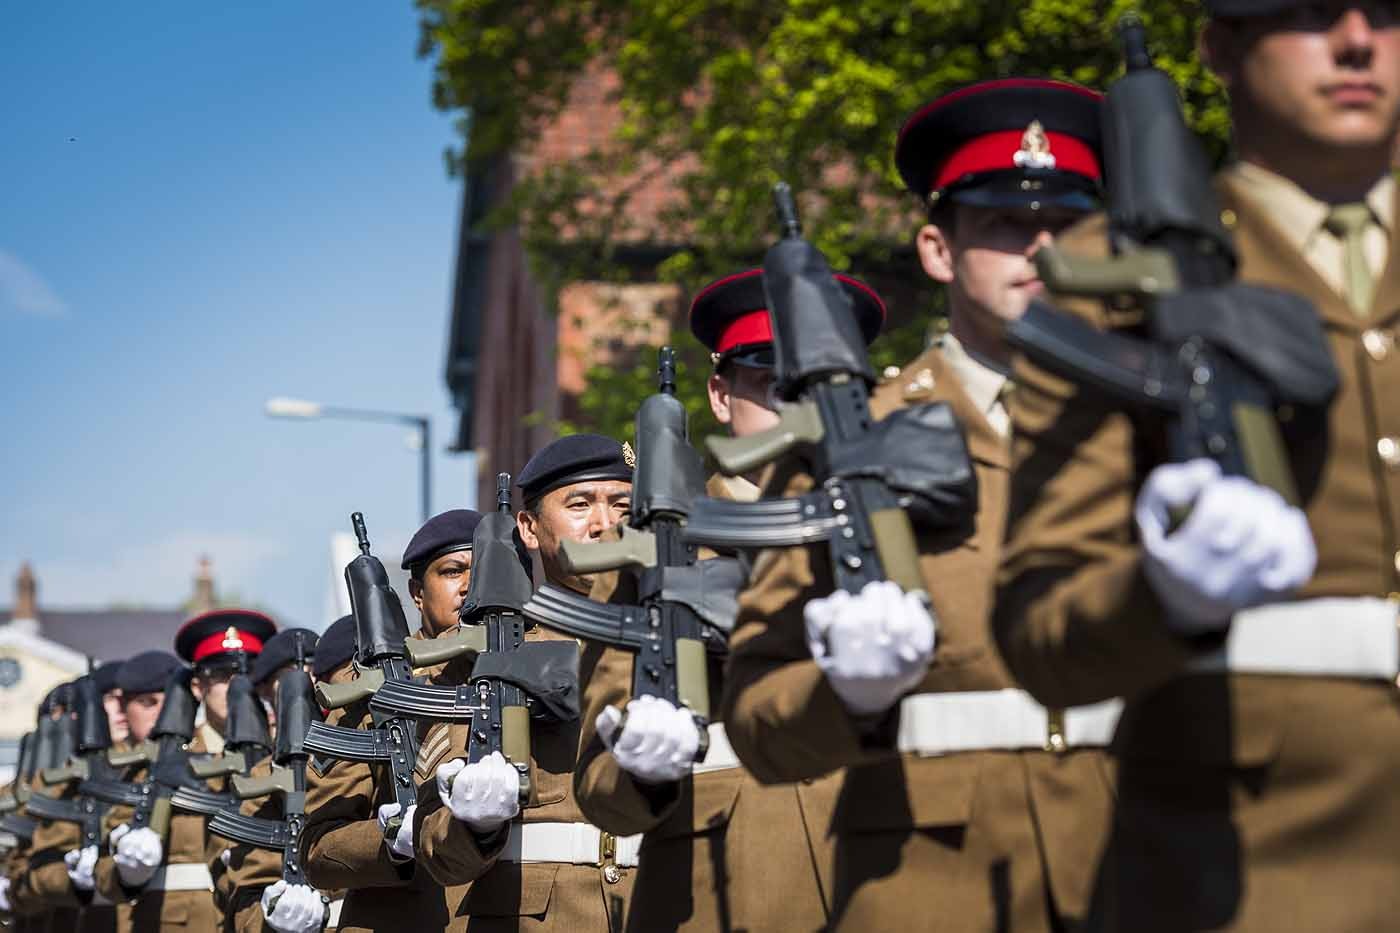 Boroughbridge salutes the soldiers on Freedom Parade